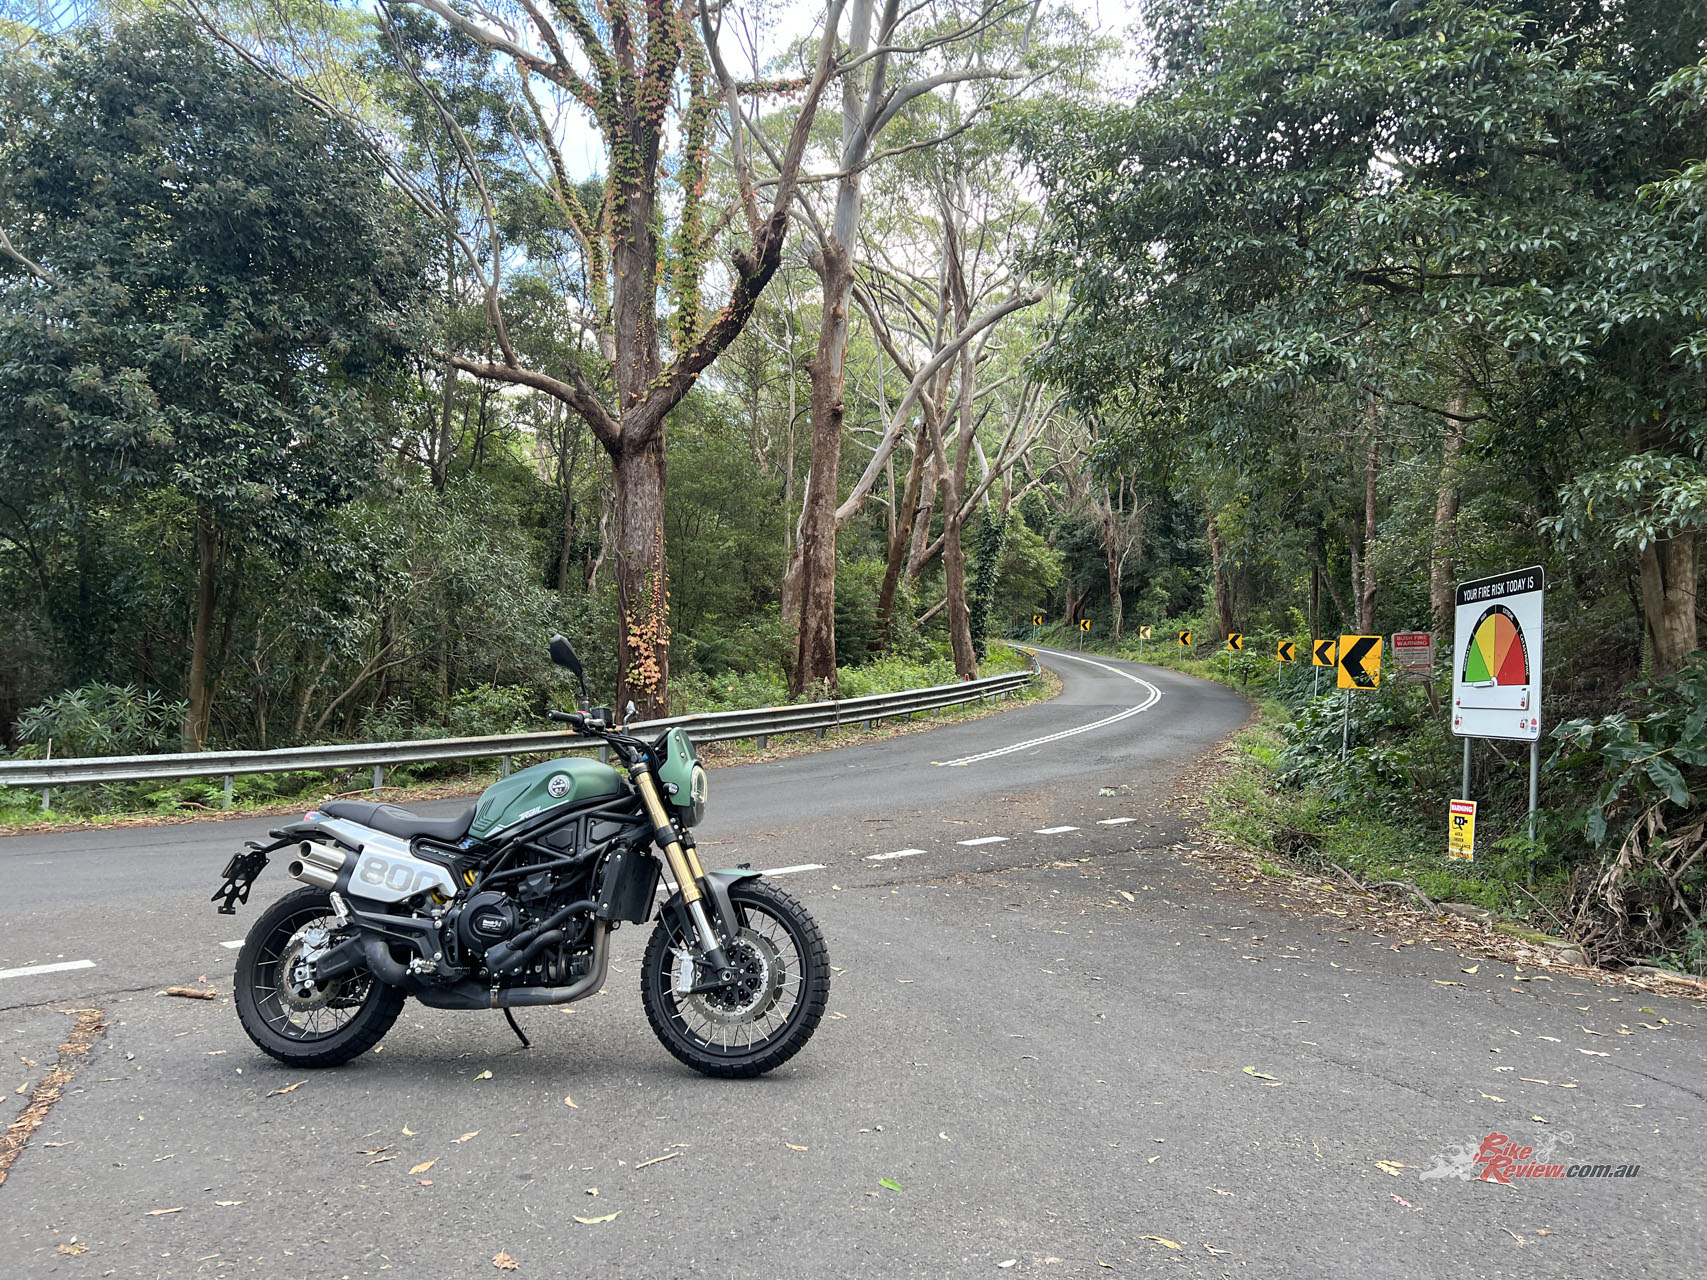 For this months update on the Benelli Leoncino 800 Trail long-termer Zane runs you through one of his local twisties, Mount Keira!